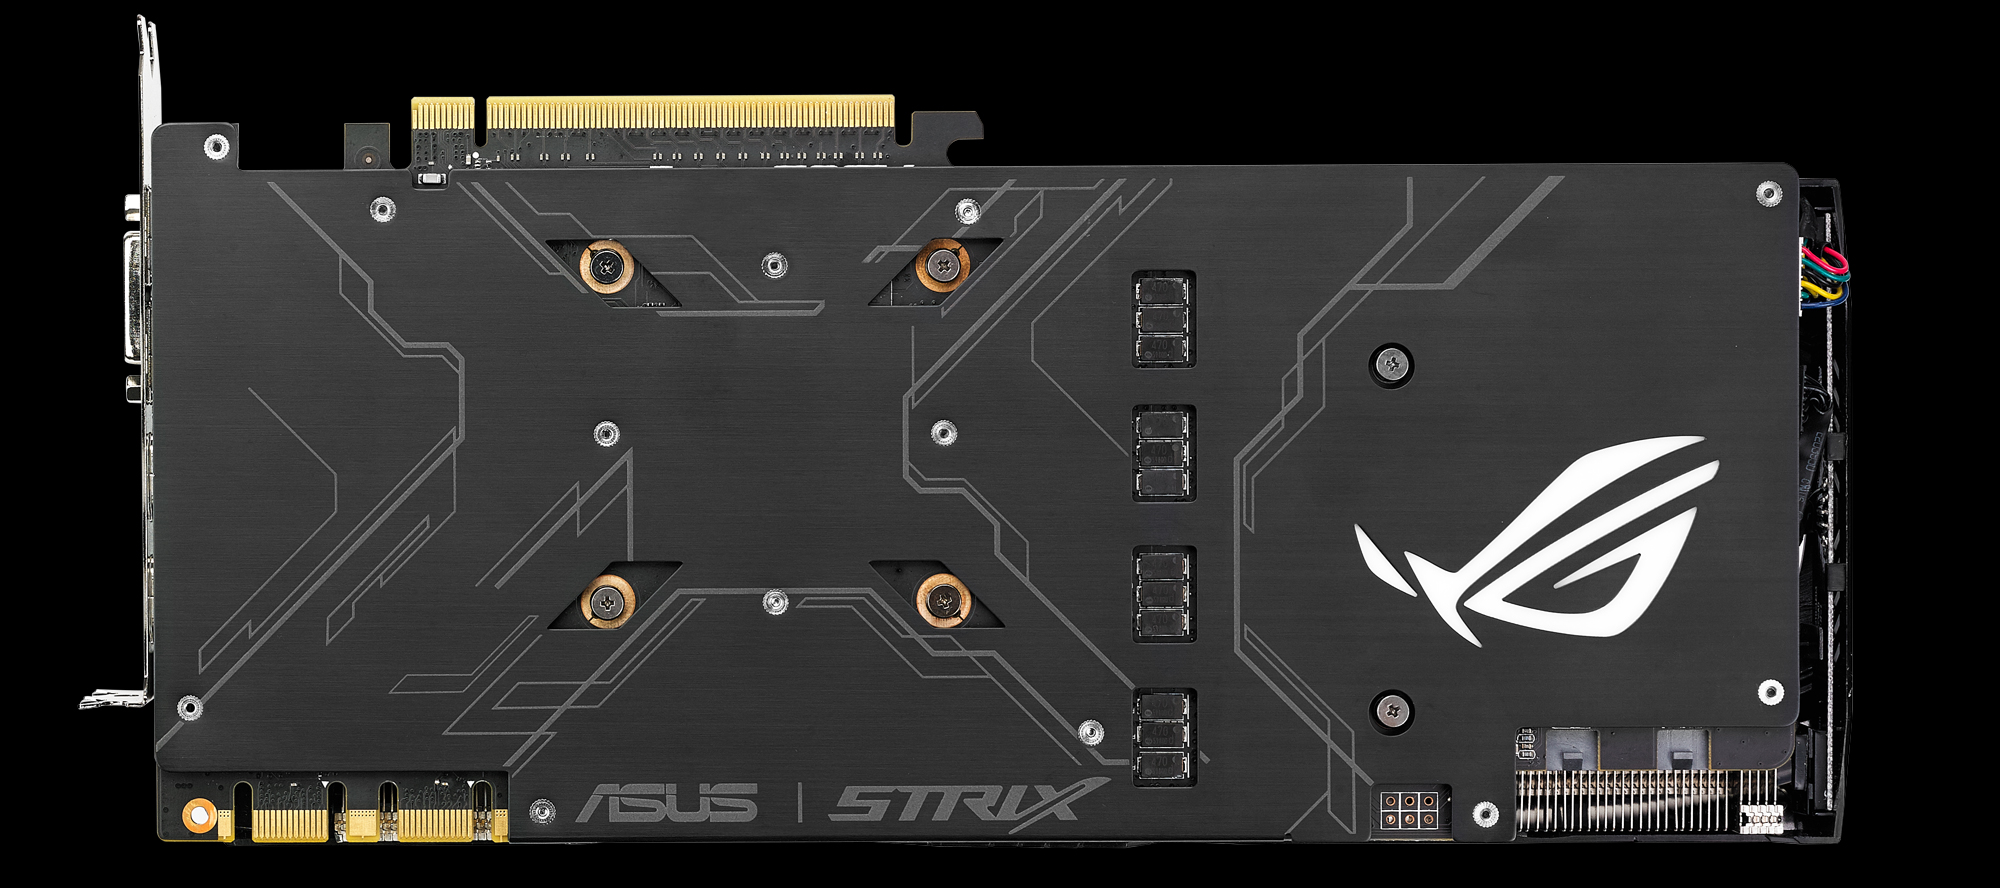 Media asset in full size related to 3dfxzone.it news item entitled as follows: ASUS annuncia due video card Republic of Gamers Strix GeForce GTX 1080 | Image Name: news24334_ASUS-ROG-Strix-GeForce-GTX-1080_2.jpg